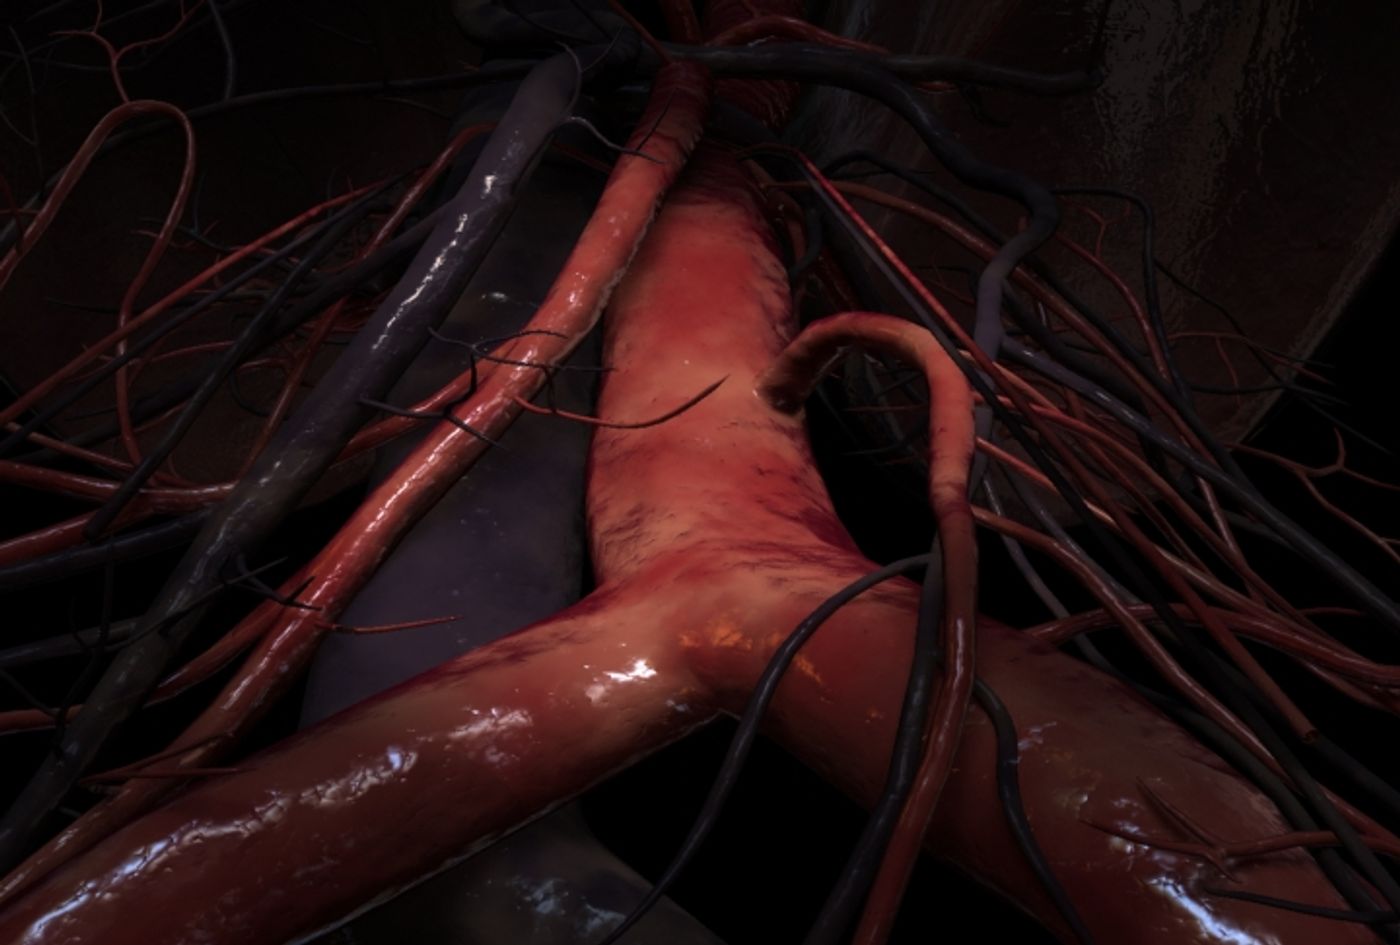 A 3D illustration of the abdominal aorta at the iliac junction. Credit: Scientific Animations